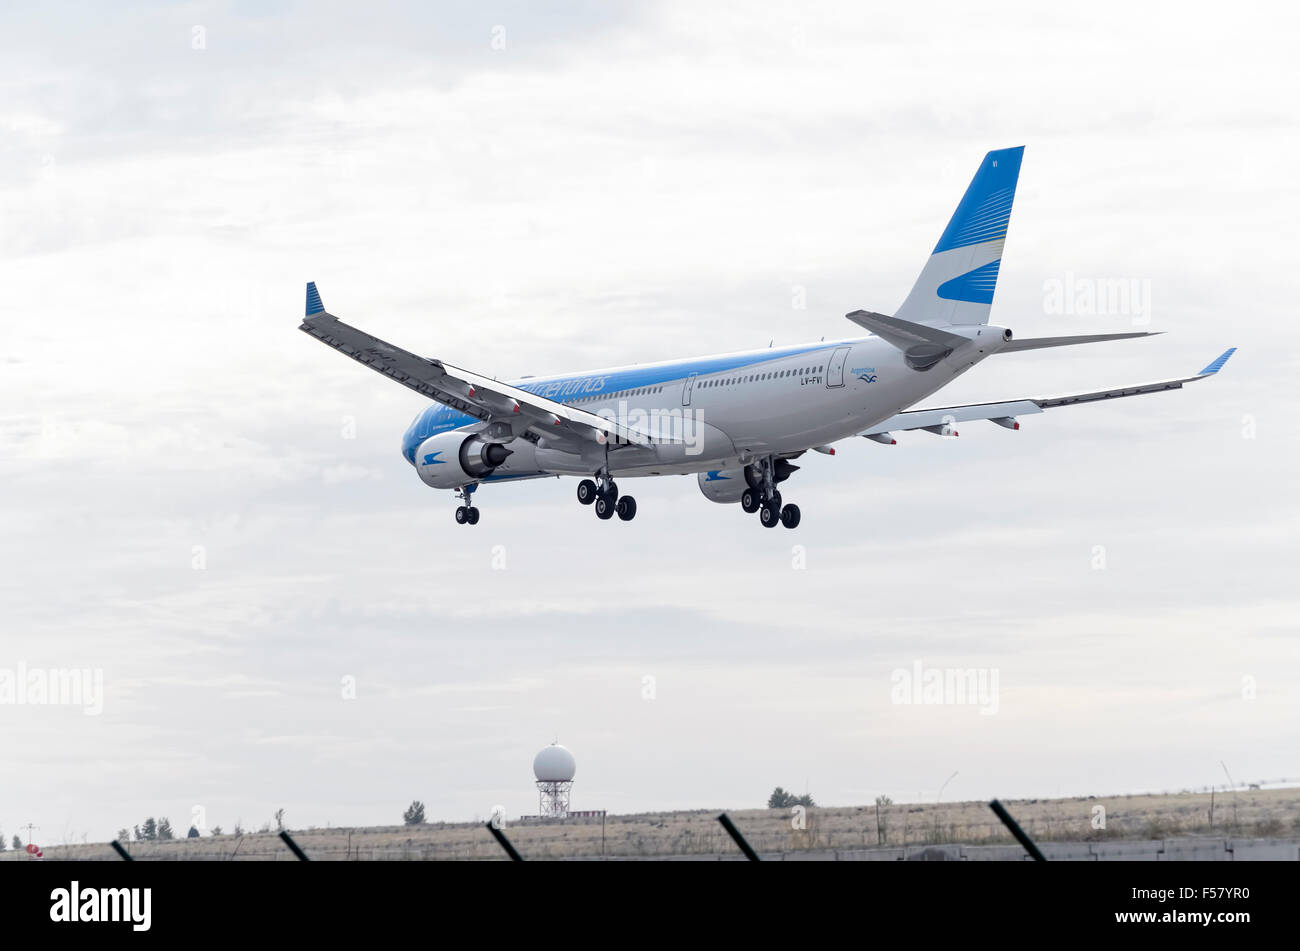 Aircraft -Airbus A330-202-, of -Aerolineas Argentinas- airline, is landing on Madrid-Barajas -Adolfo Suarez- airport Stock Photo